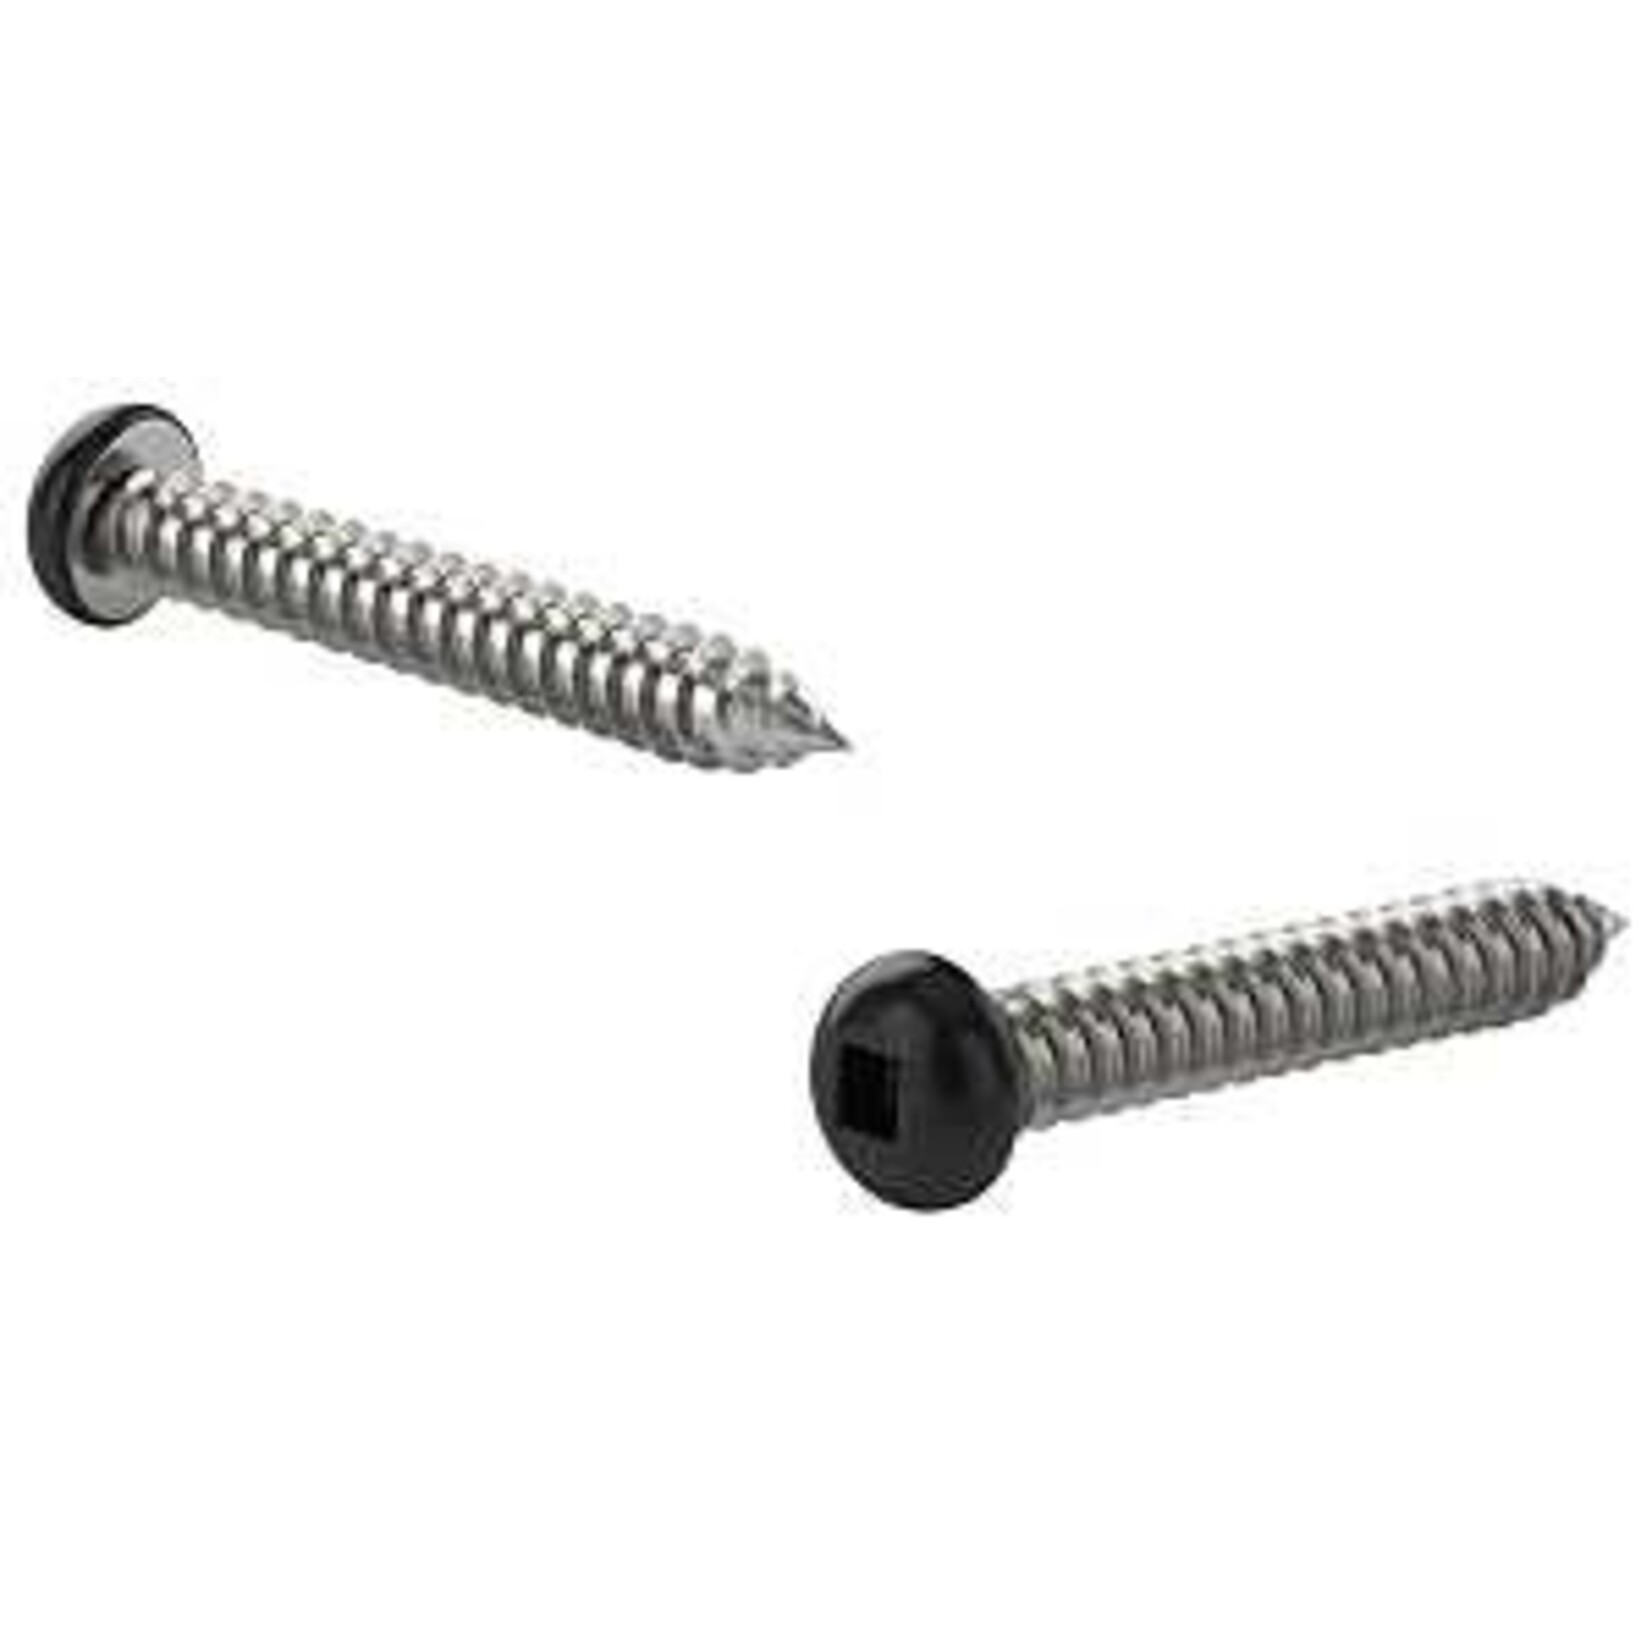 RELIABLE COLORED SCREW BLACK, PAN HEAD, SELF-TAPPING #8 1-14IN, 100PK